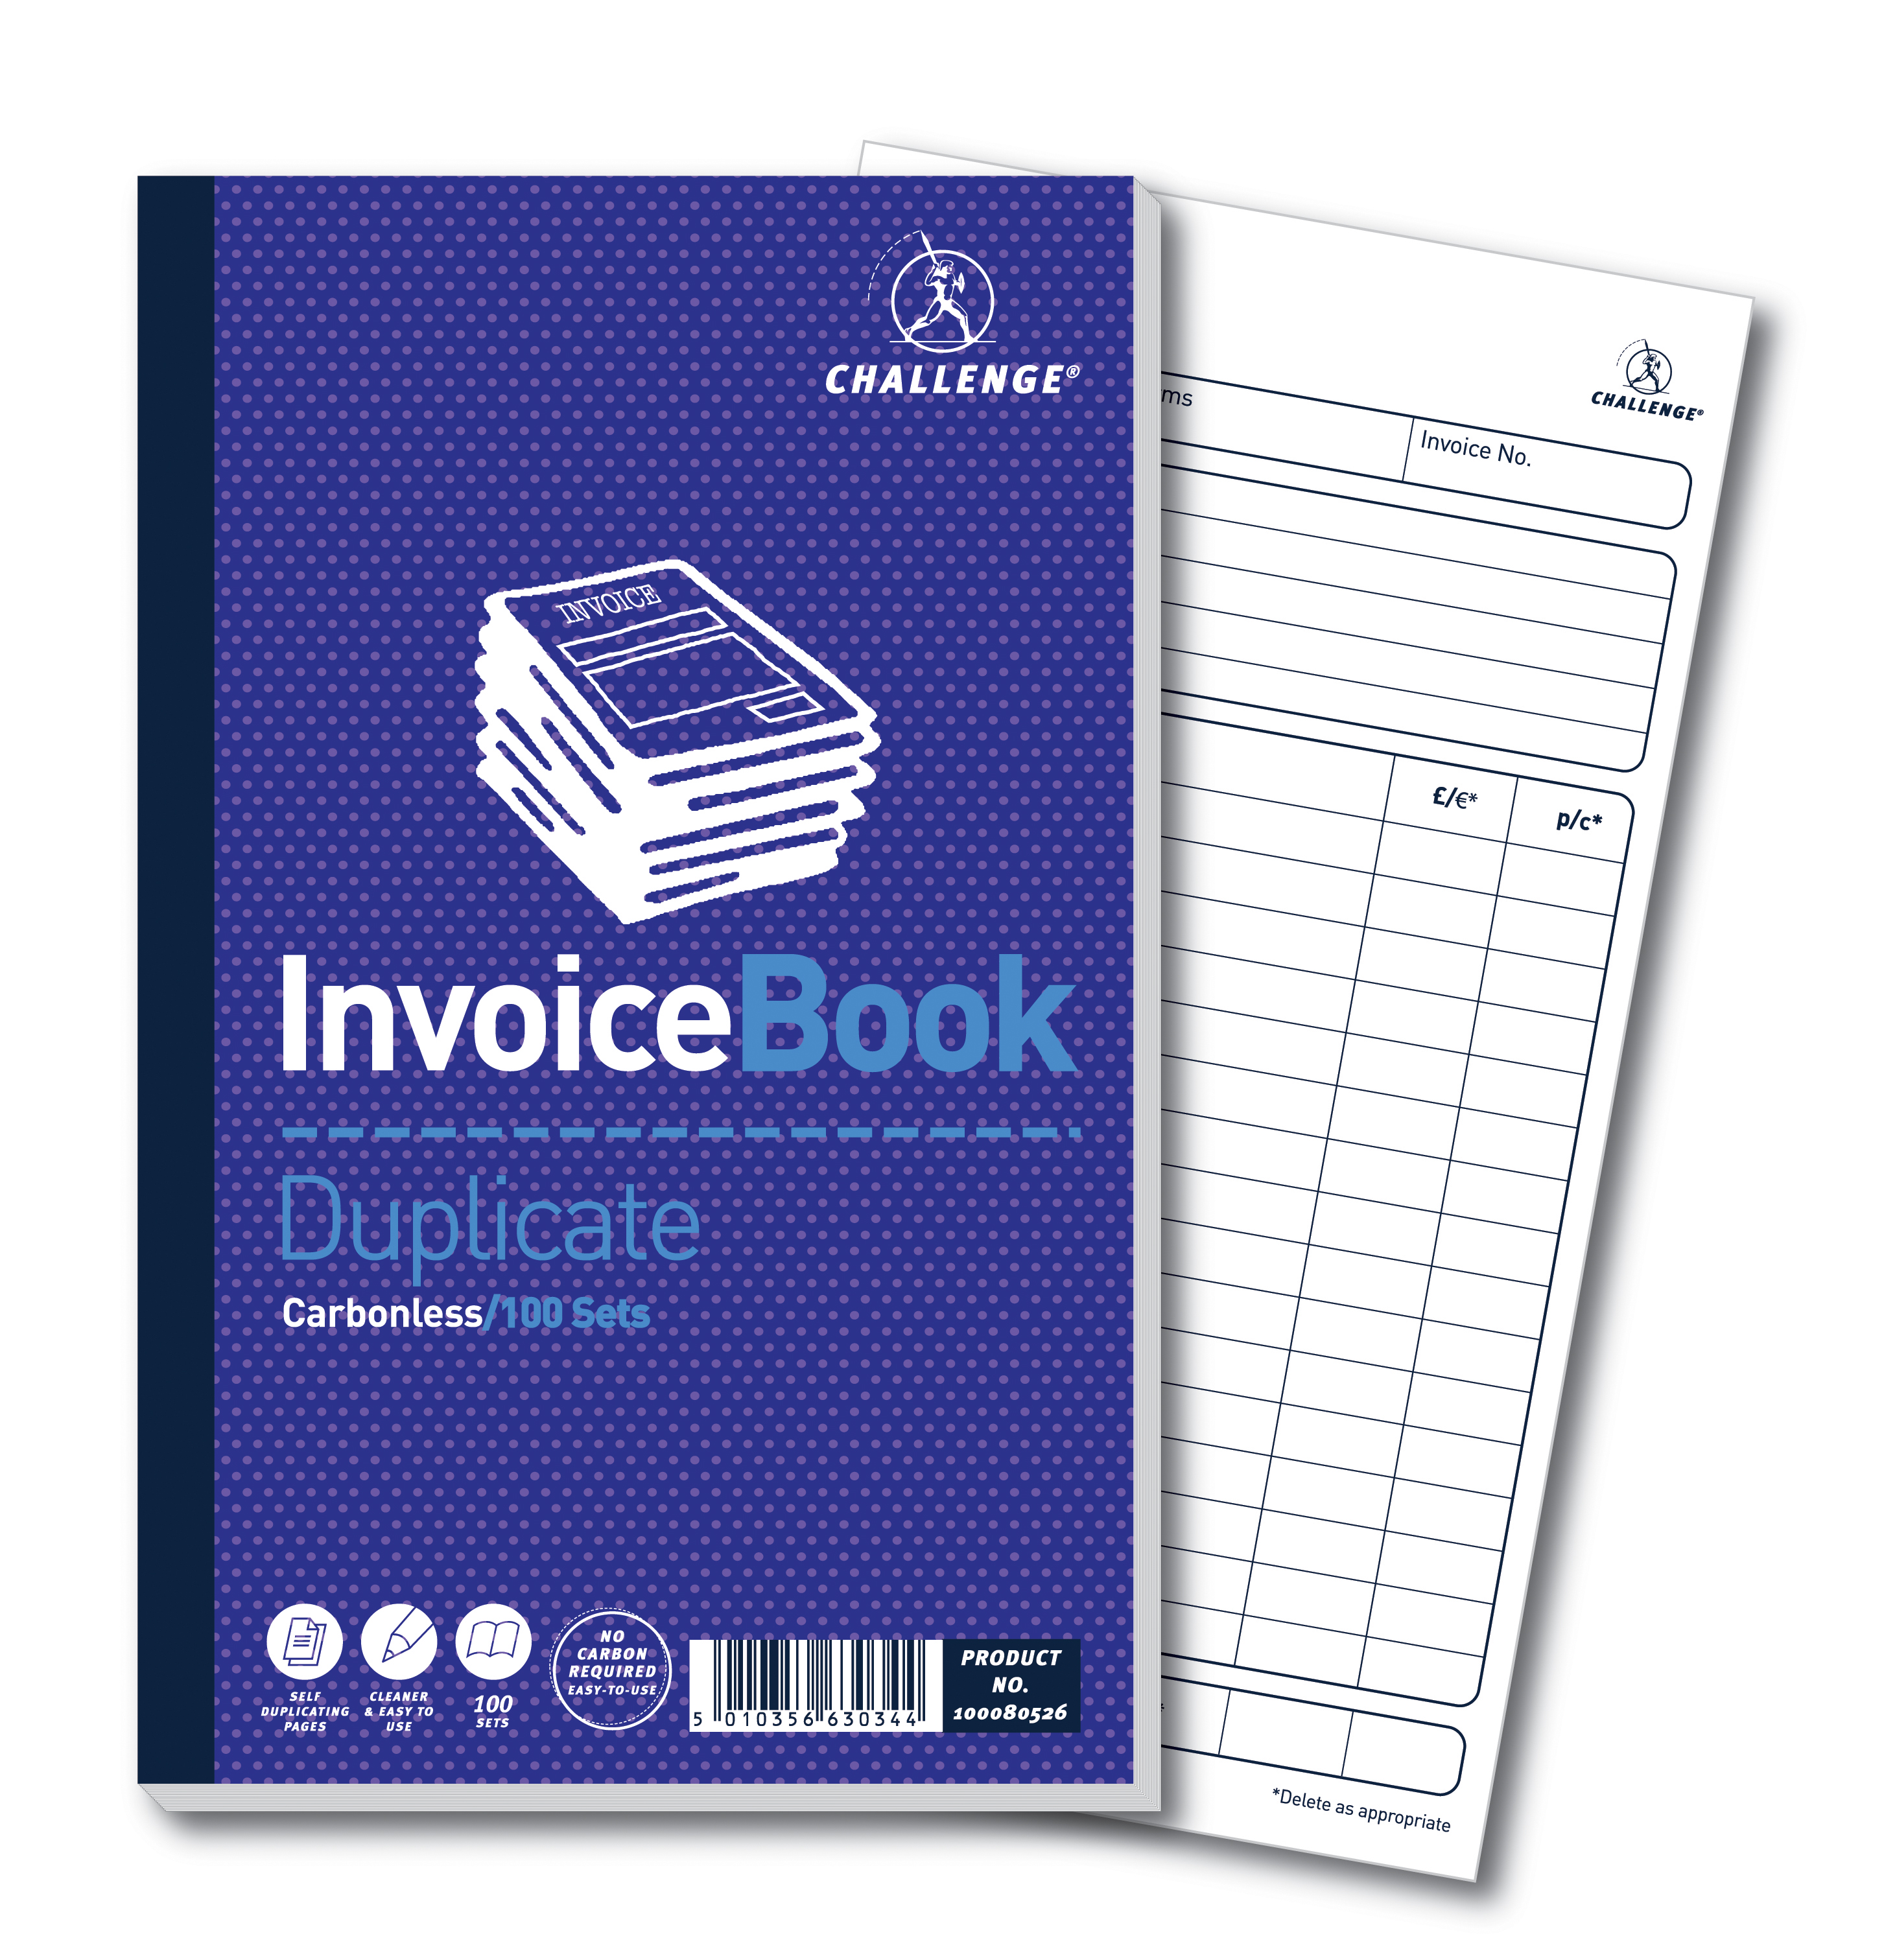 Challenge Duplicate Invoice Book 210x130mm Card Cover Without VAT 100 Sets Pack 5 100080526